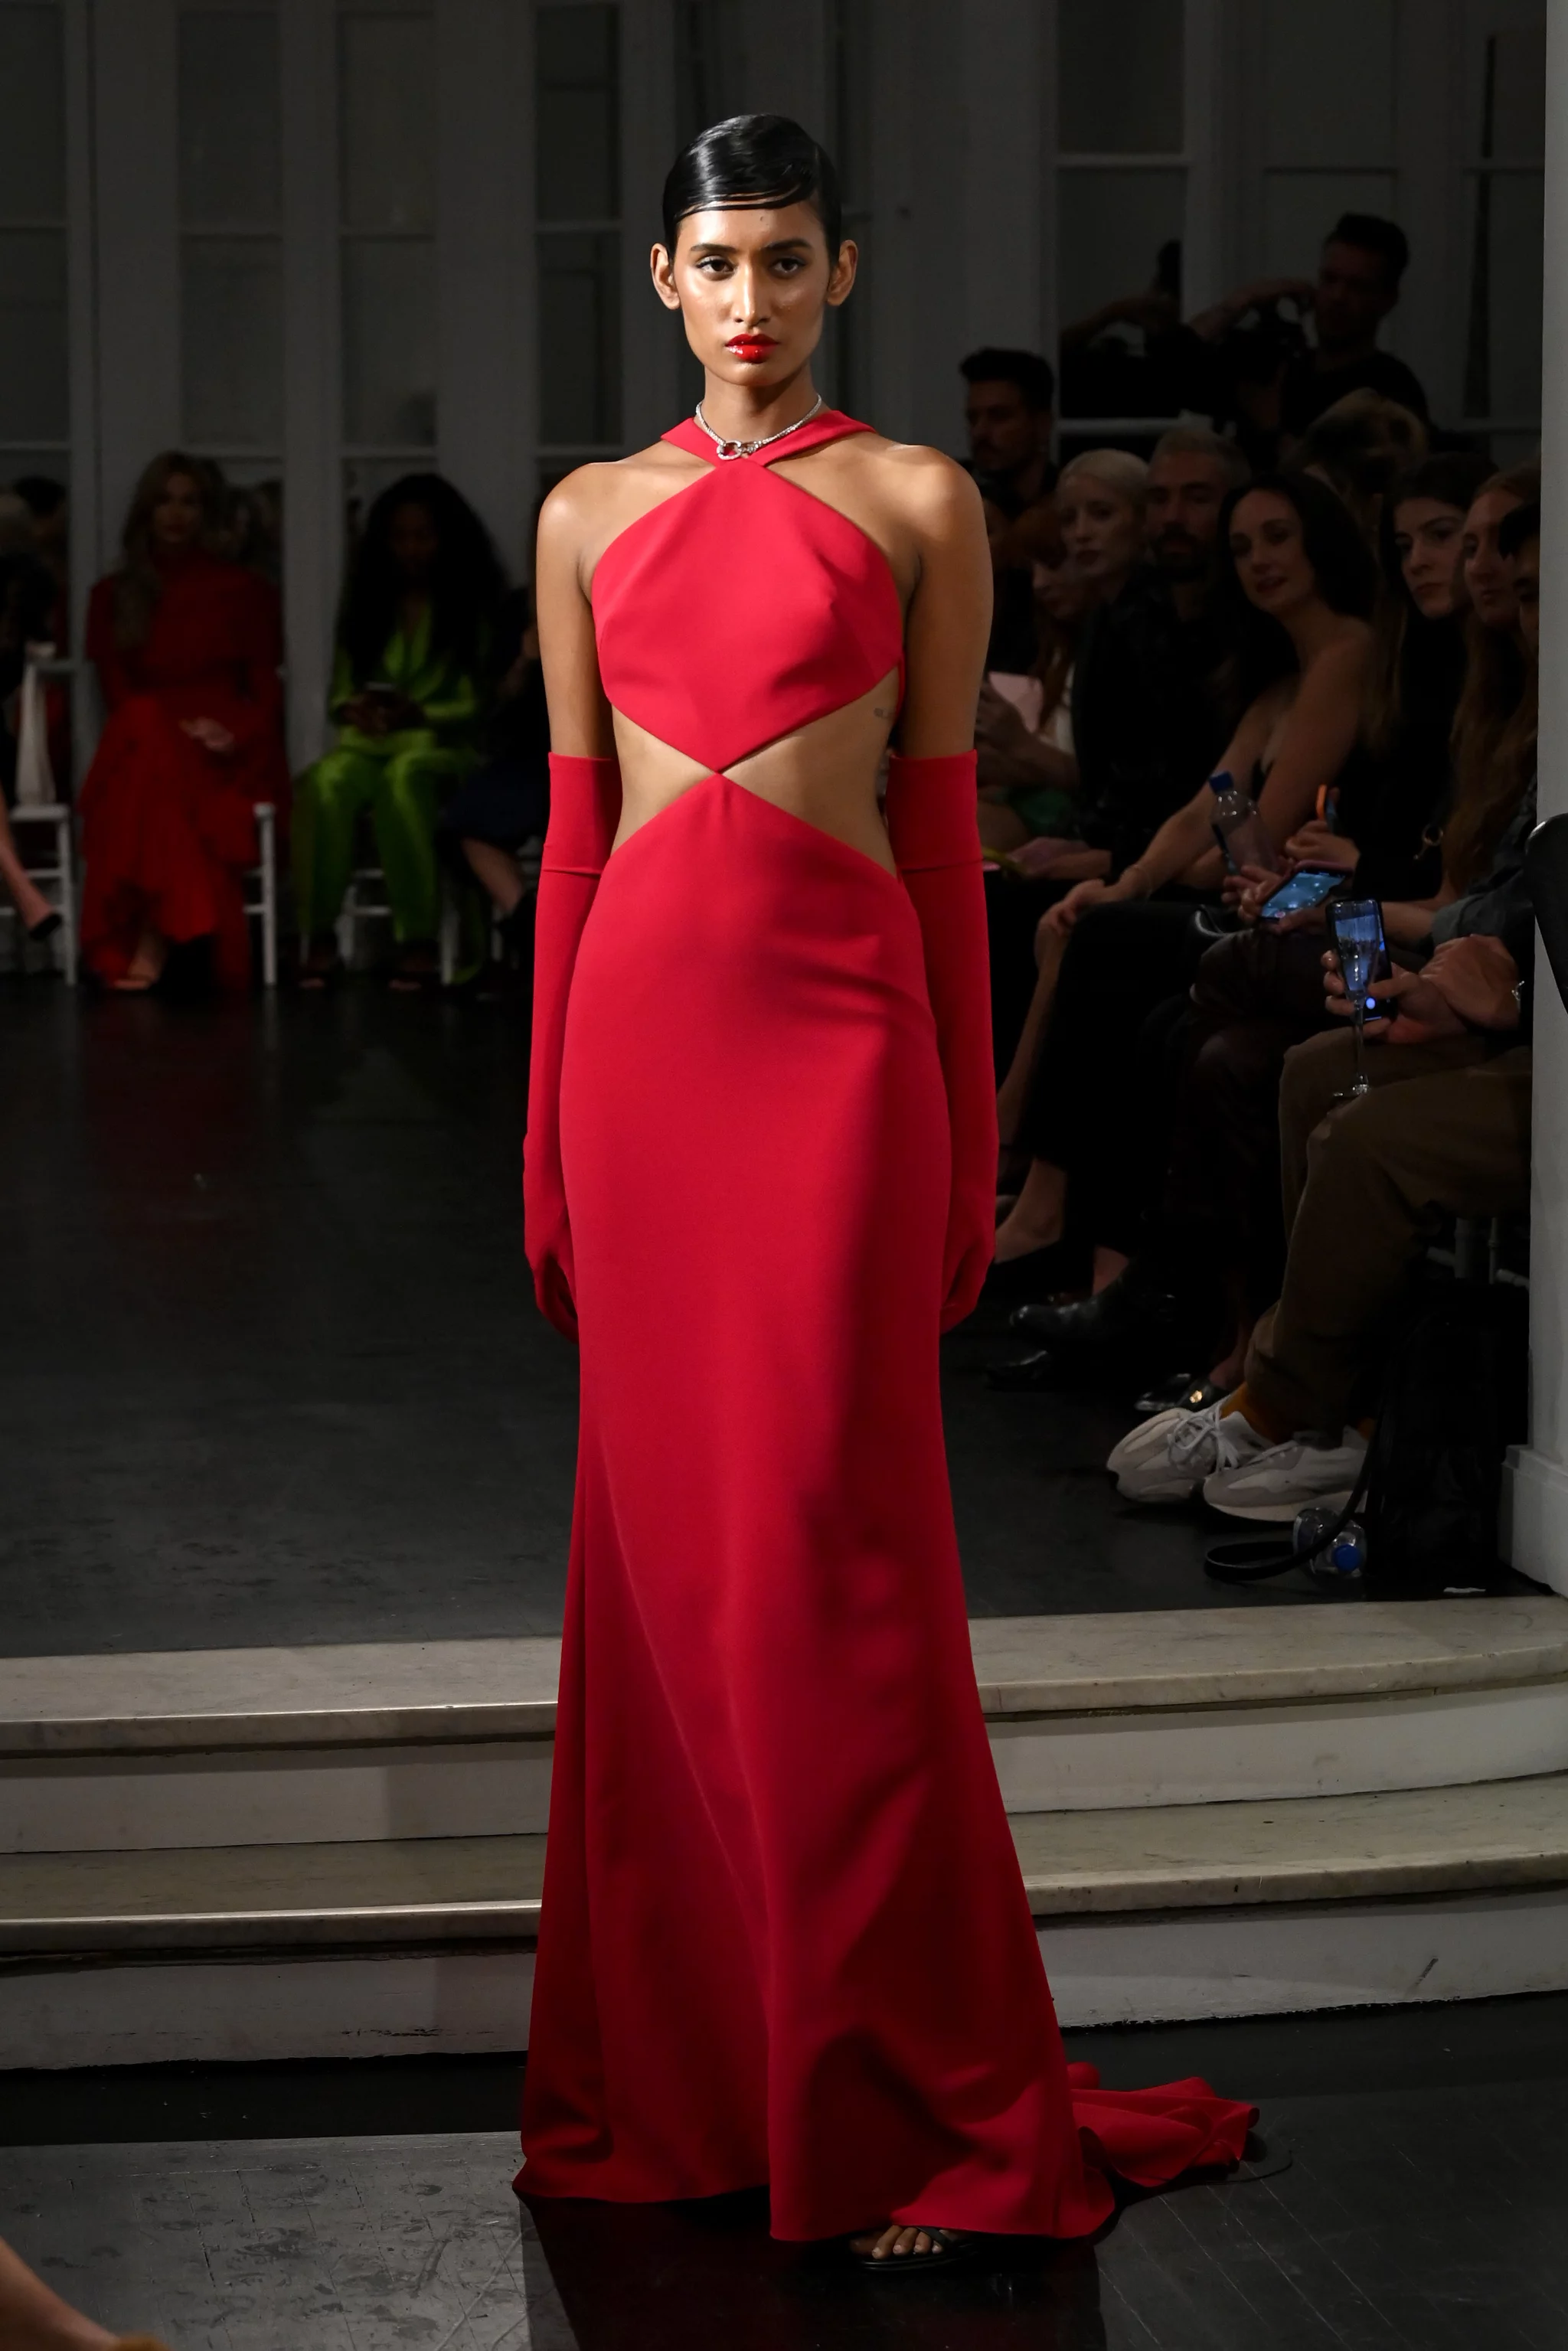 Christian Siriano's Spring 2023 Ready-to-Wear Show